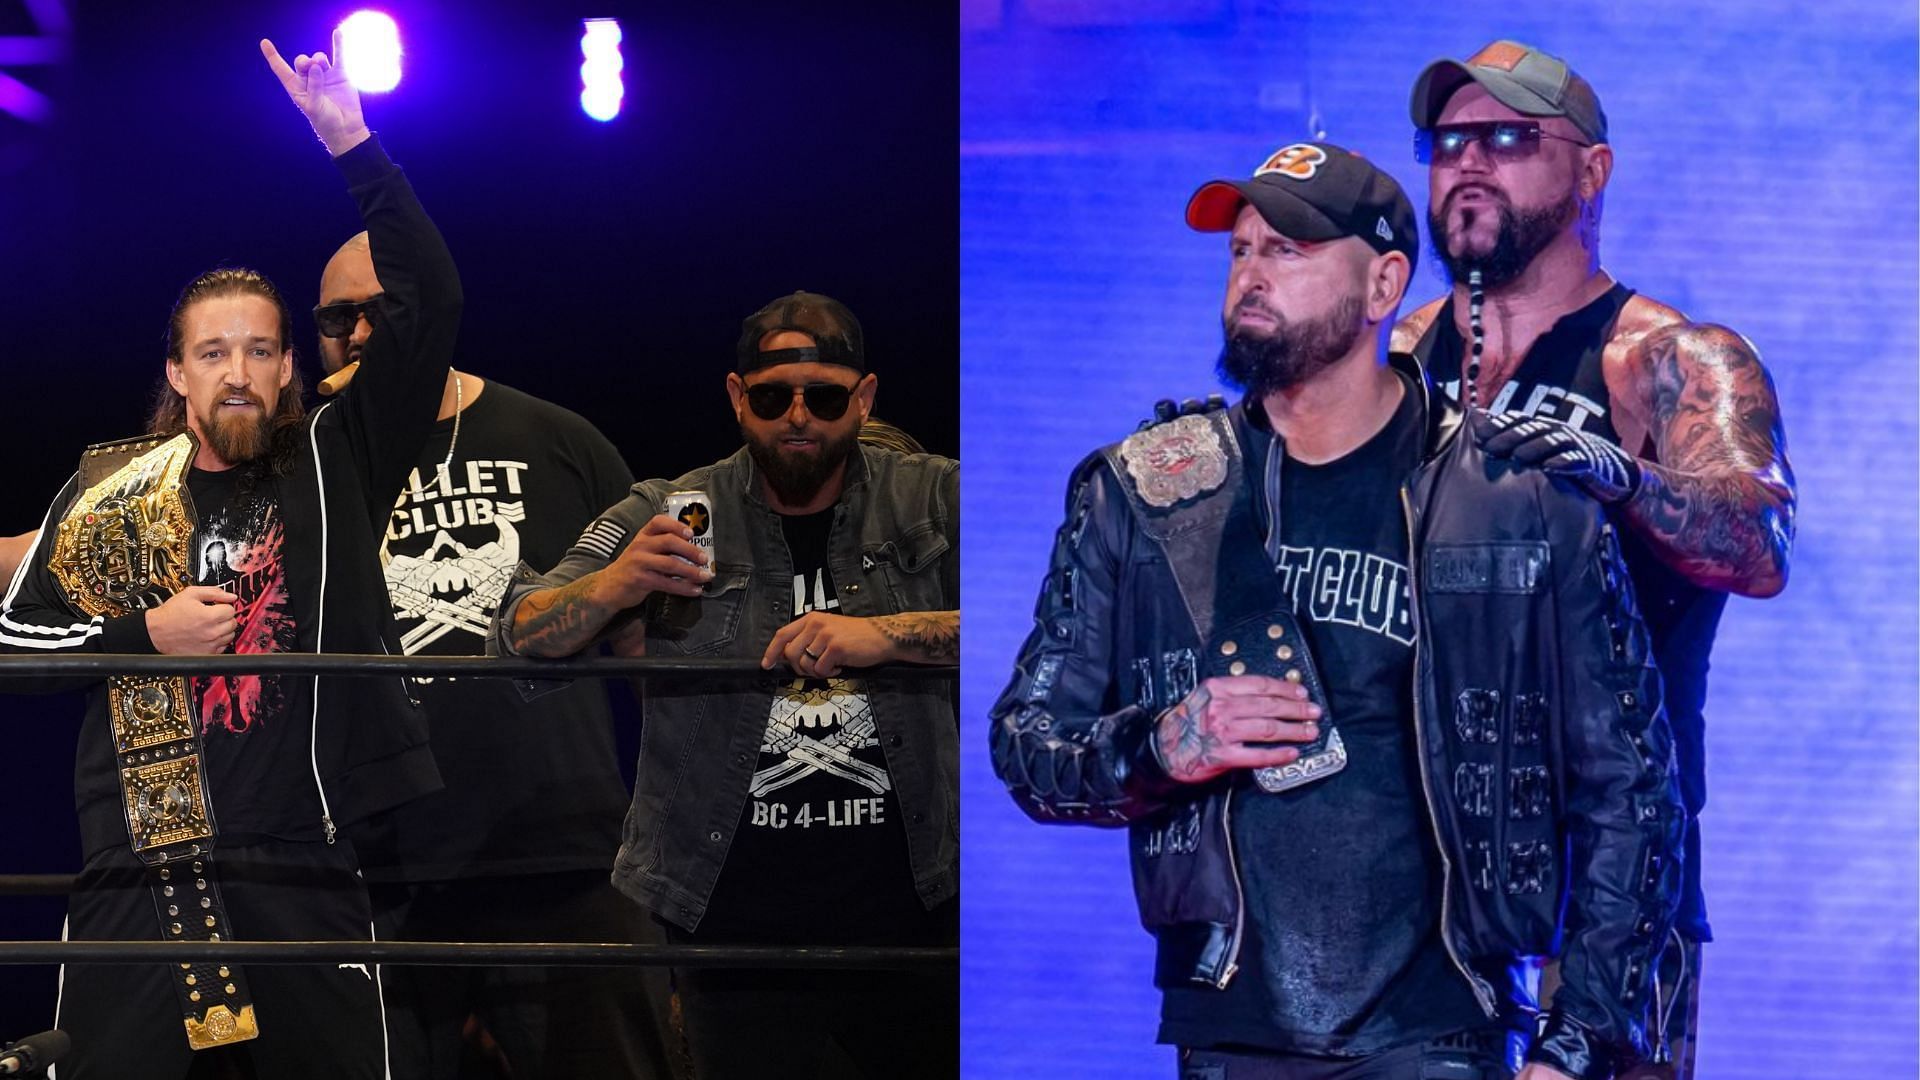 Karl Anderson is currently a member of The Bullet Club